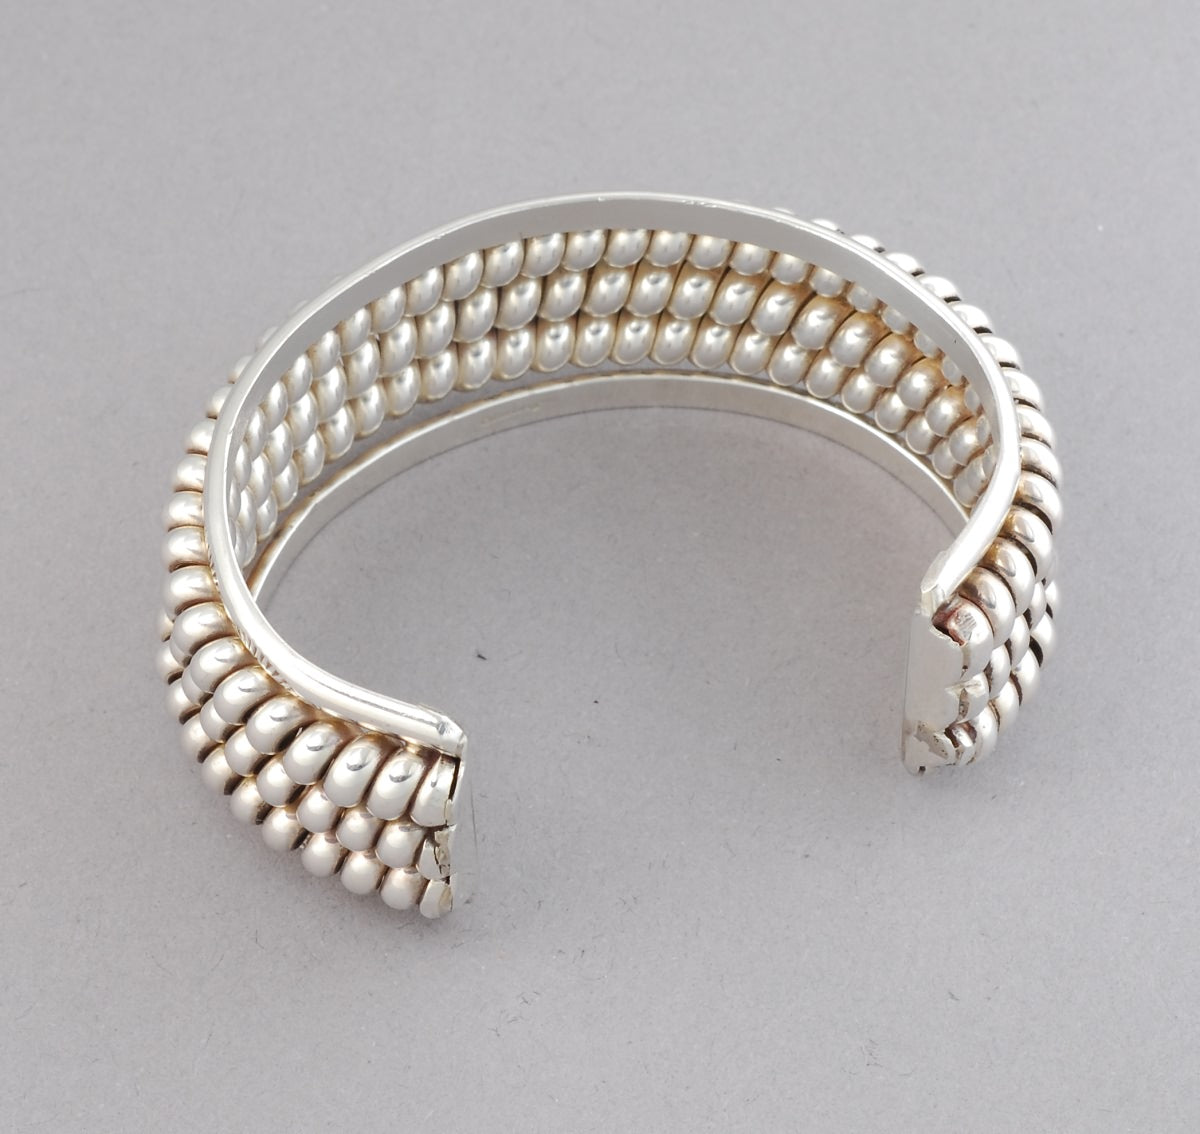 Cuff Bracelet with Three Coil "Telephone Cord"